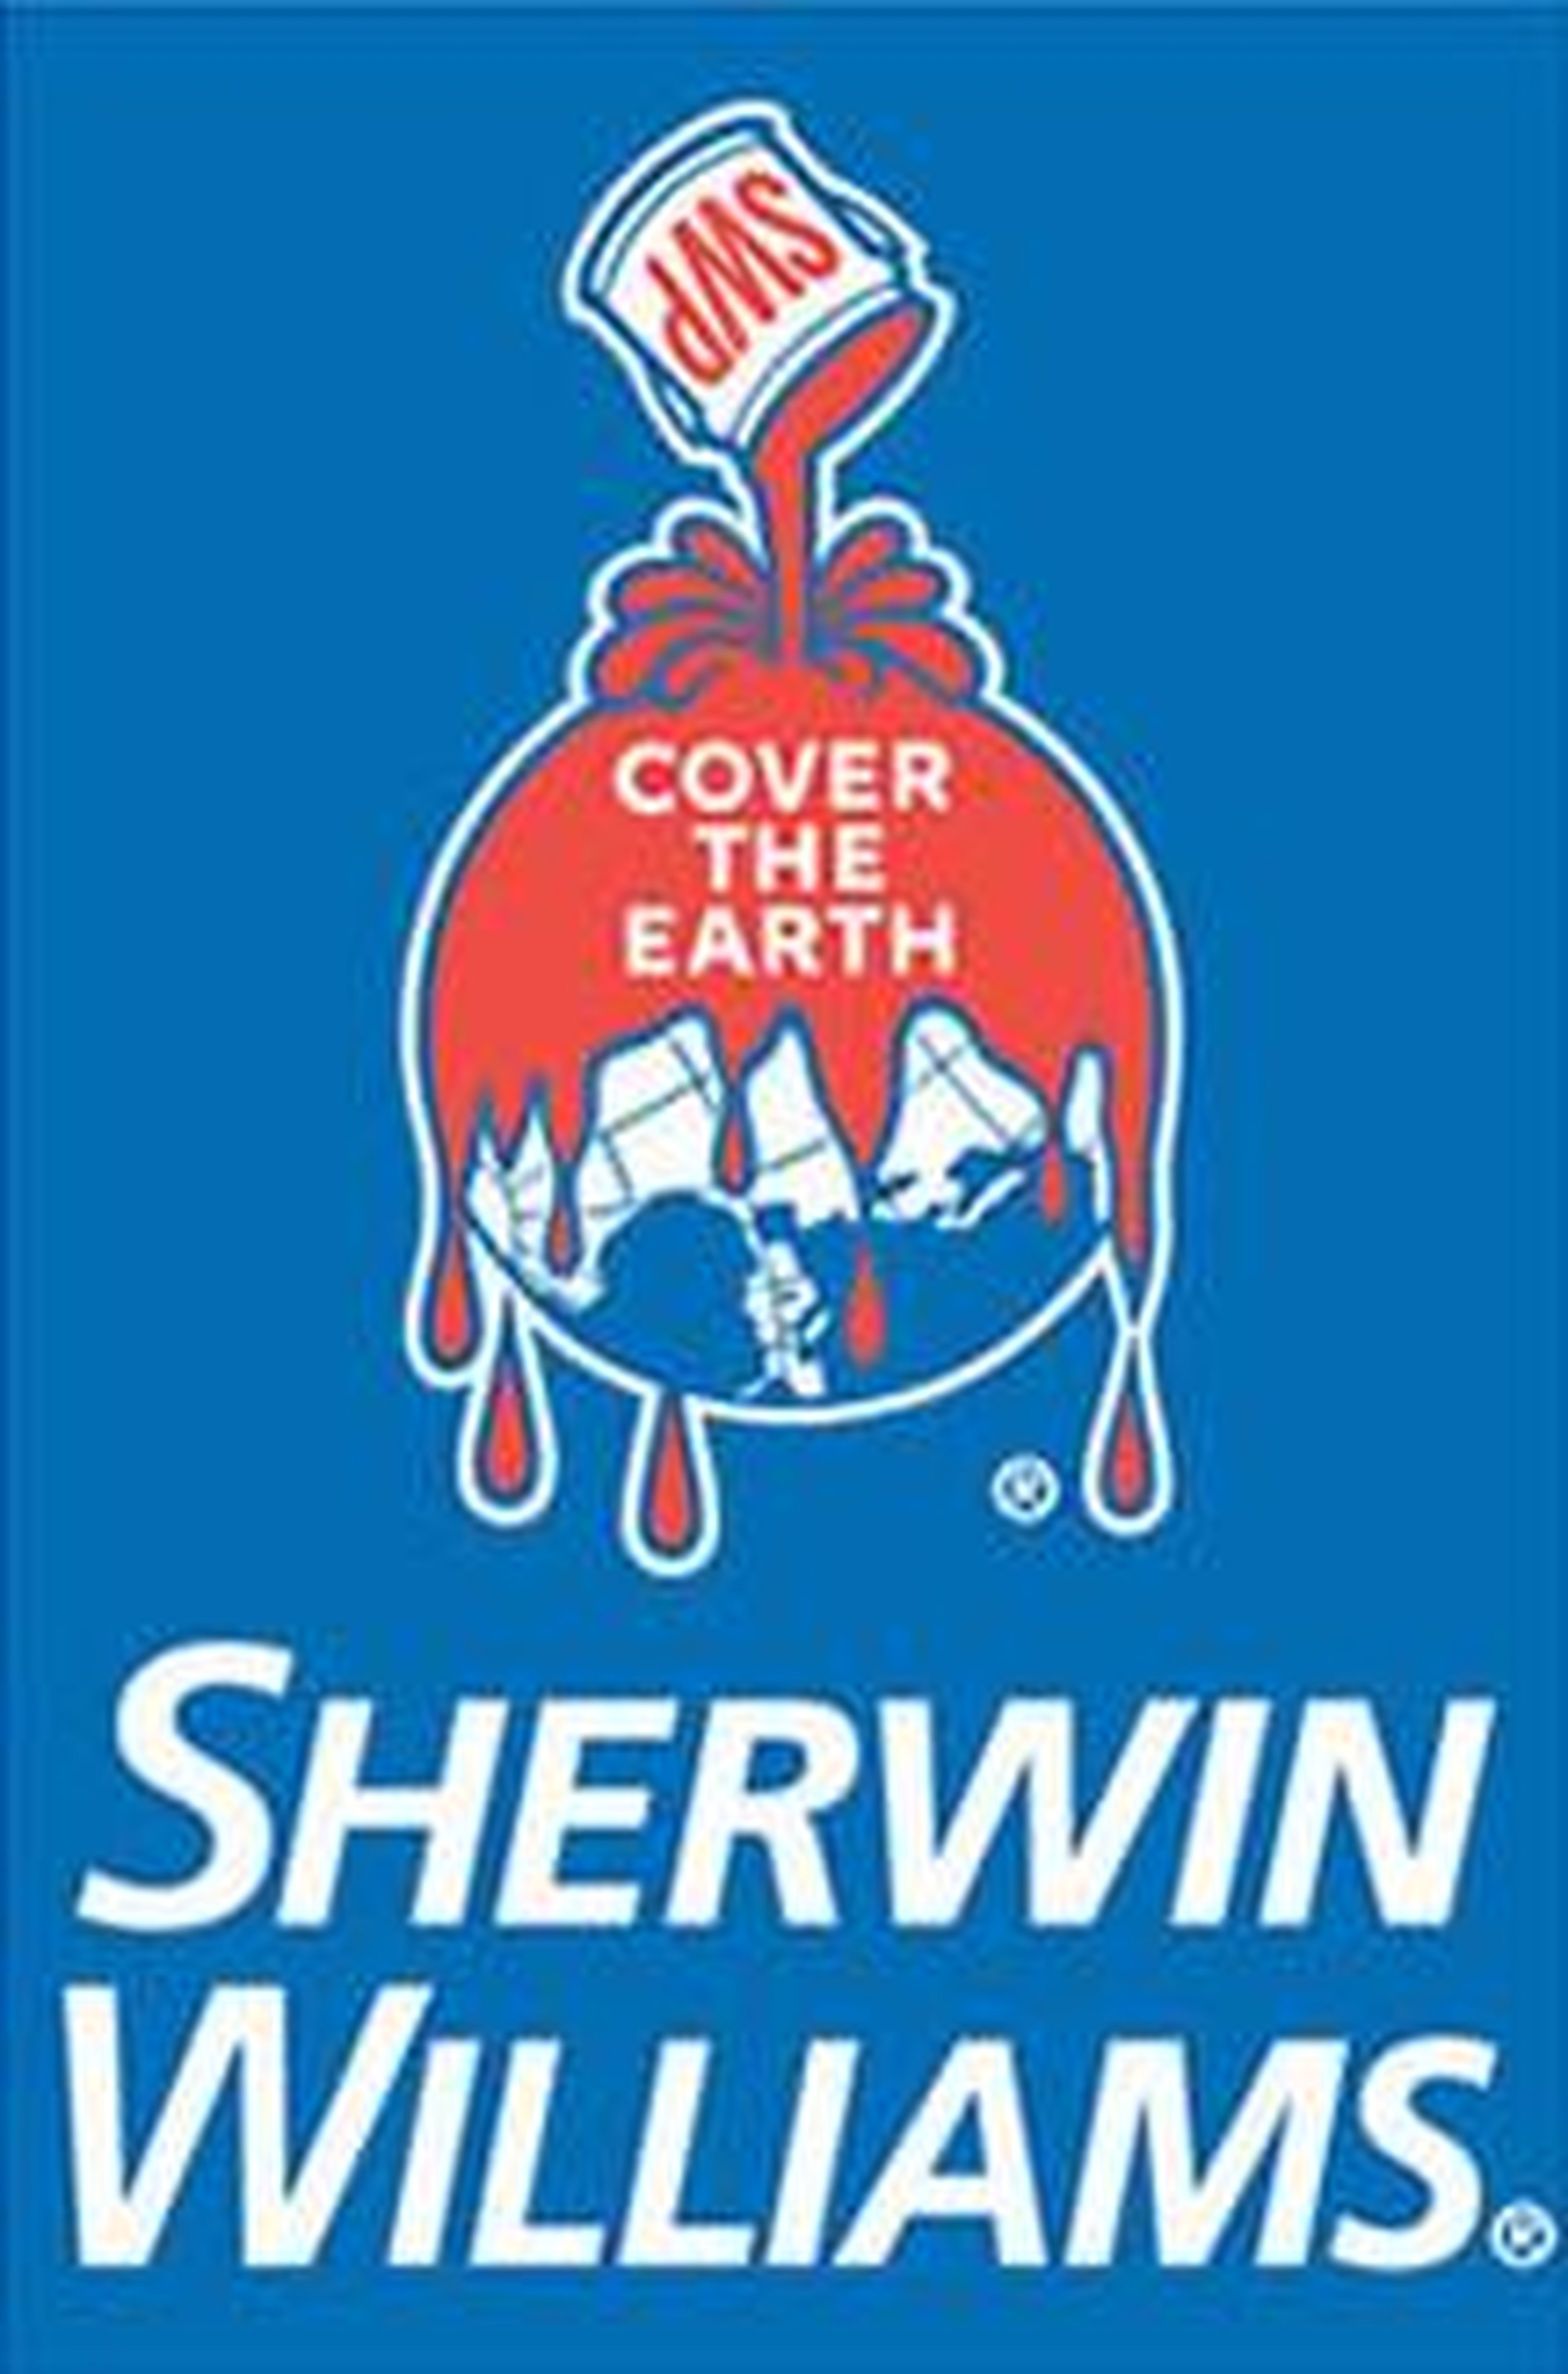 "Cover the earth"